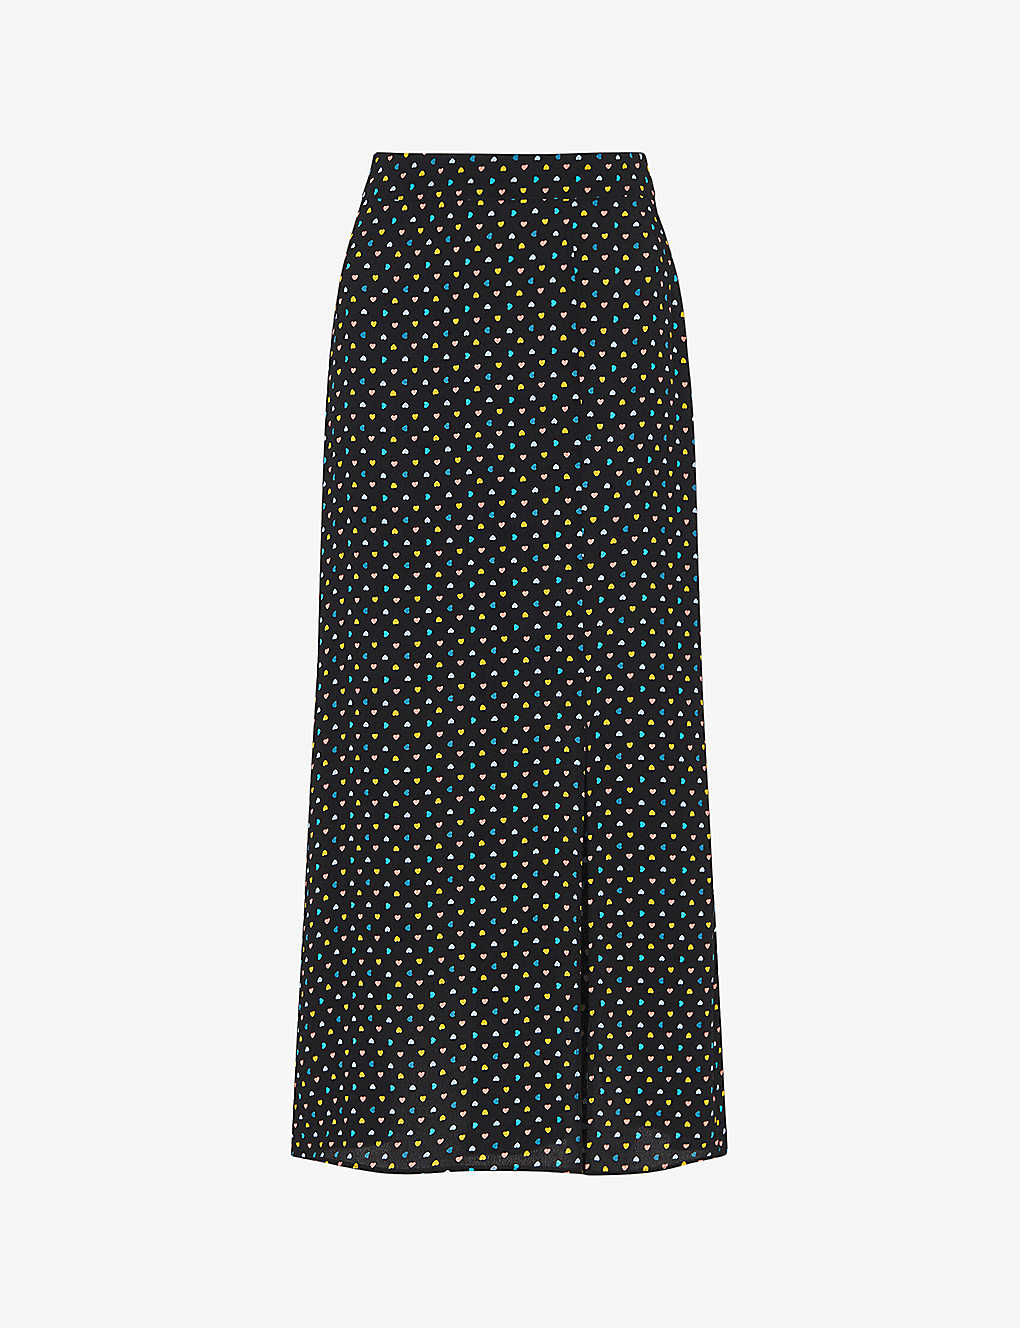 Whistles Womens Black Scattered Hearts Graphic-print Woven Midi Skirt